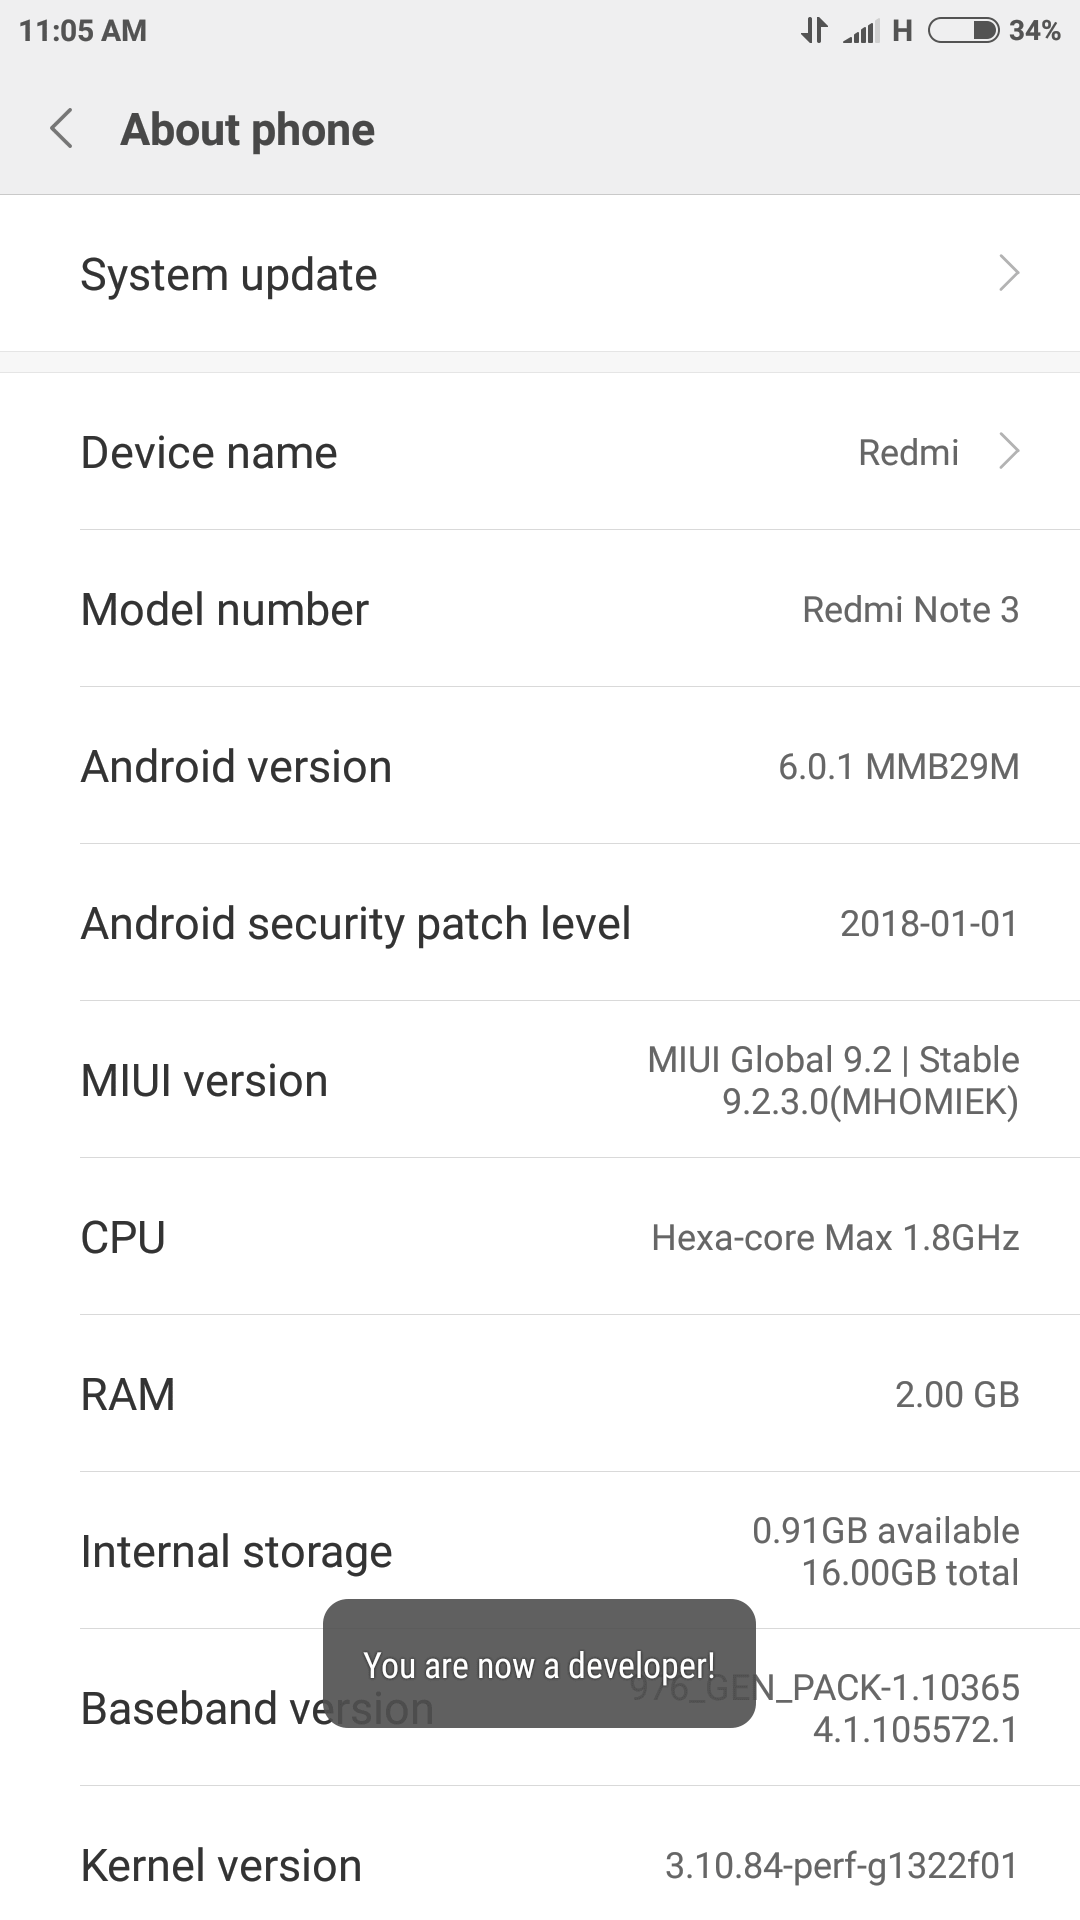 You can enable developer options by tapping 7-8 times on the build number in ‘About phone’ section